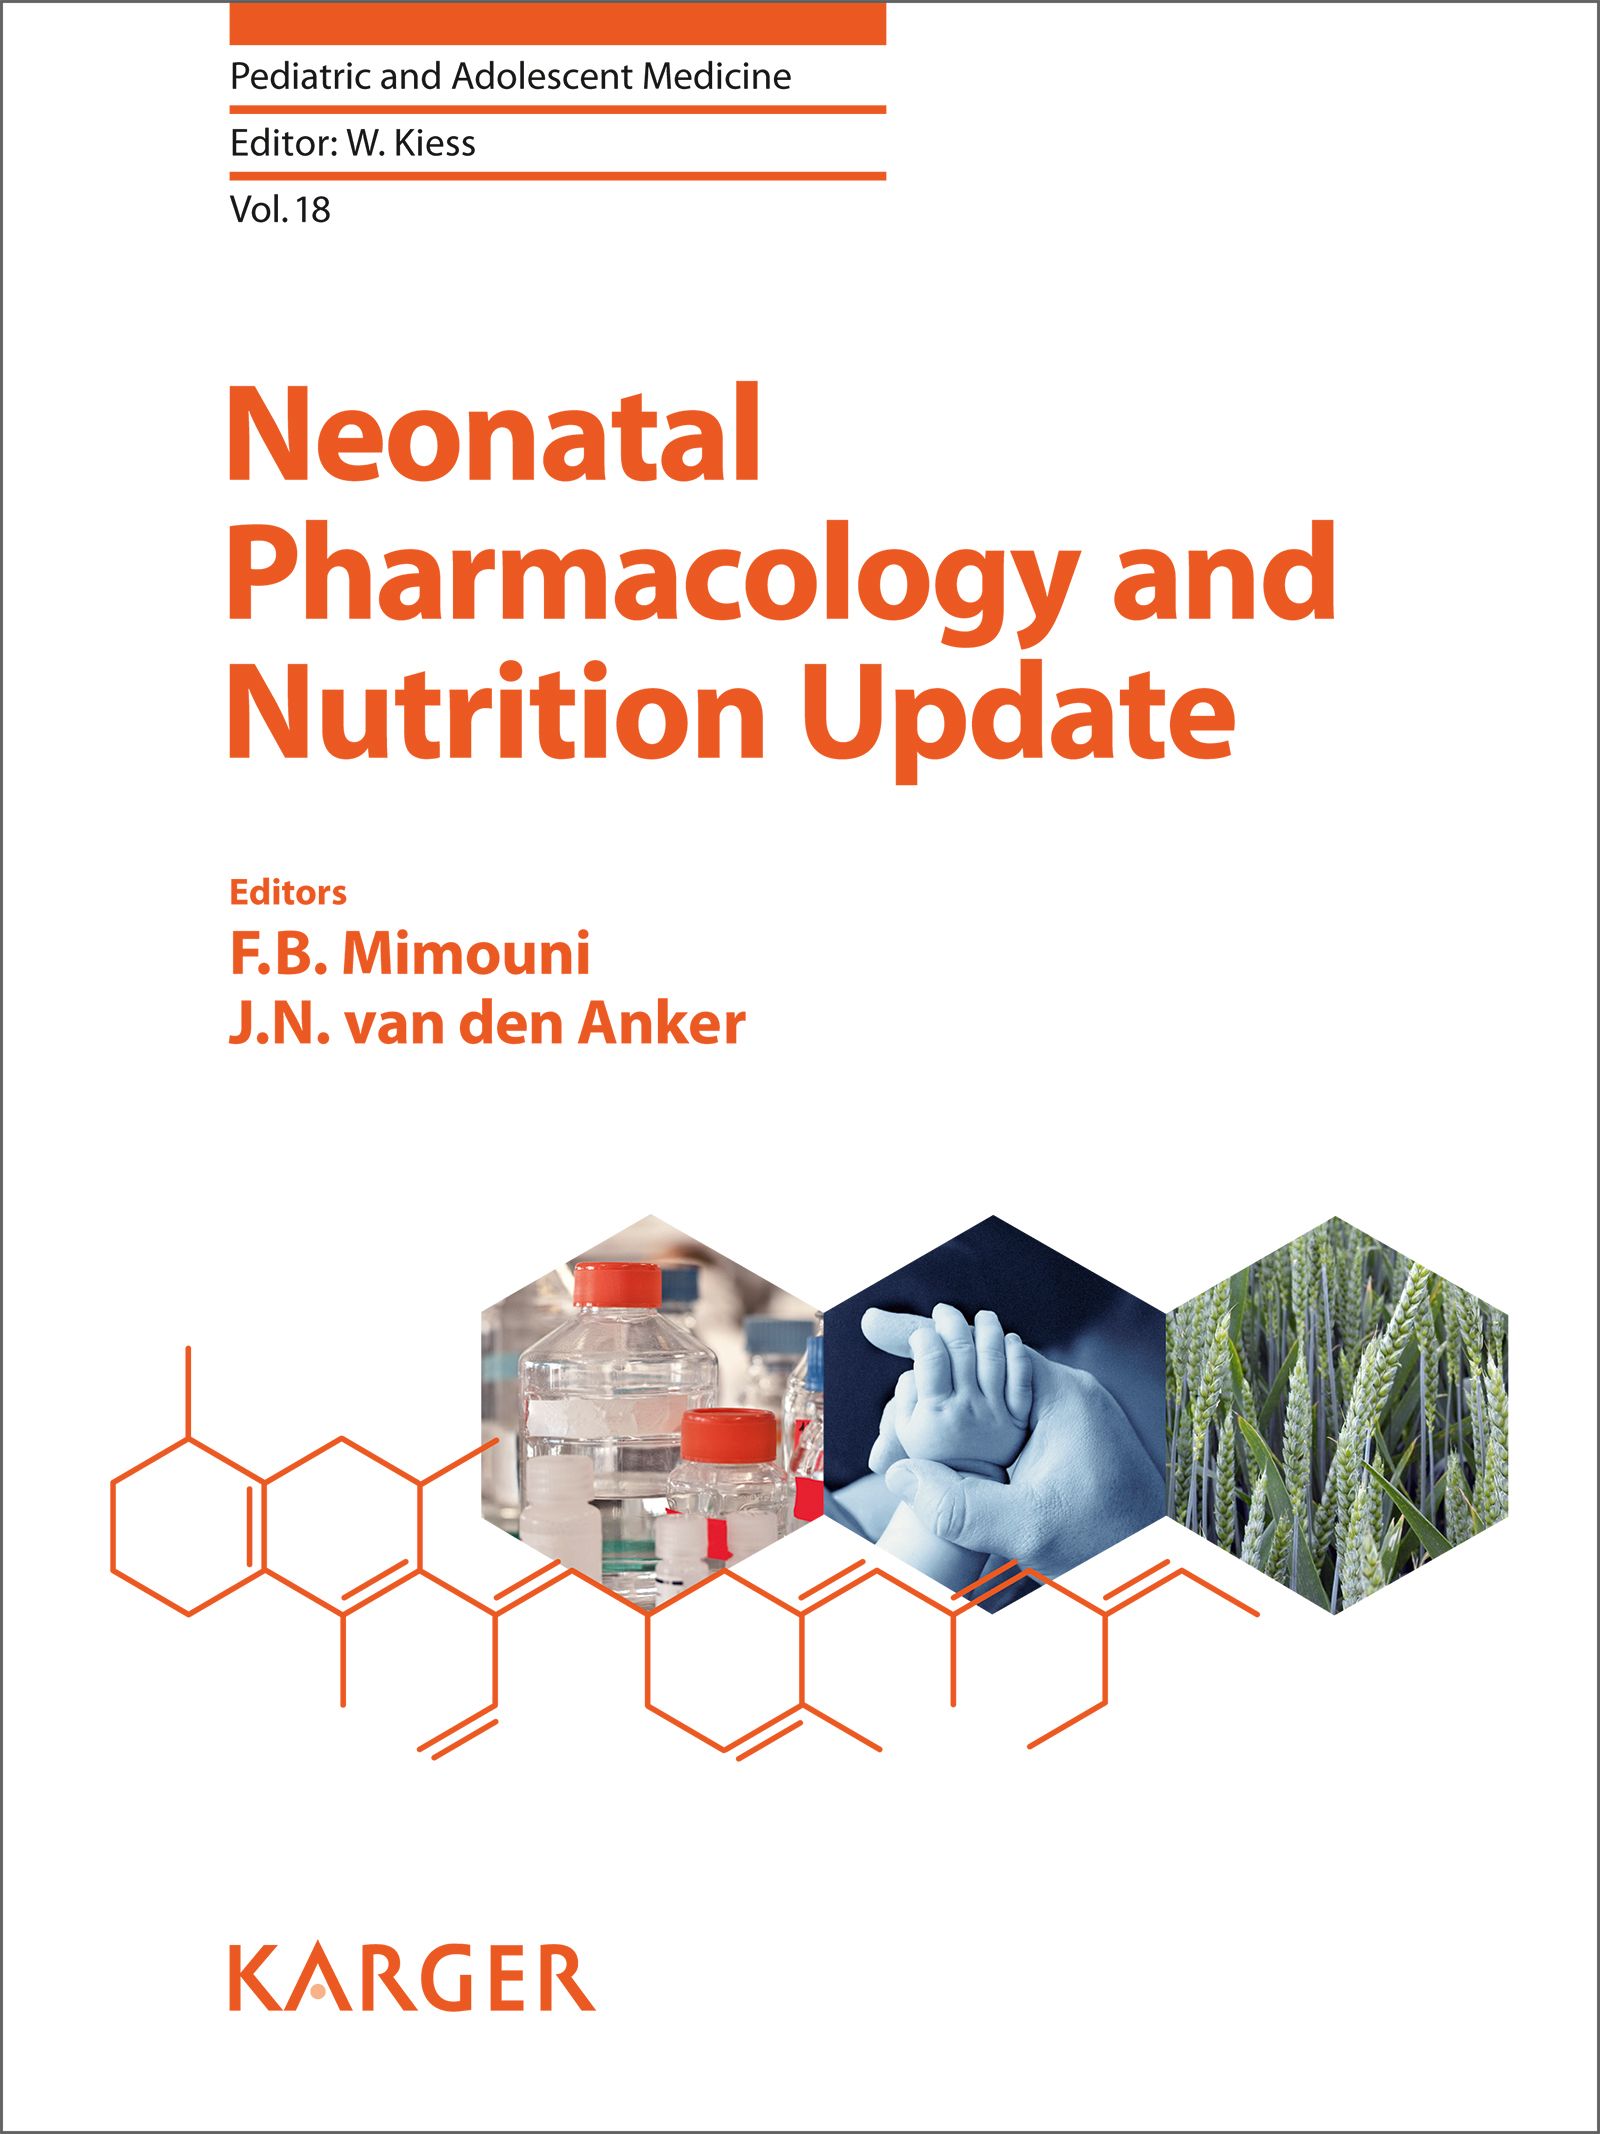 Neonatal Pharmacology and Nutrition Update